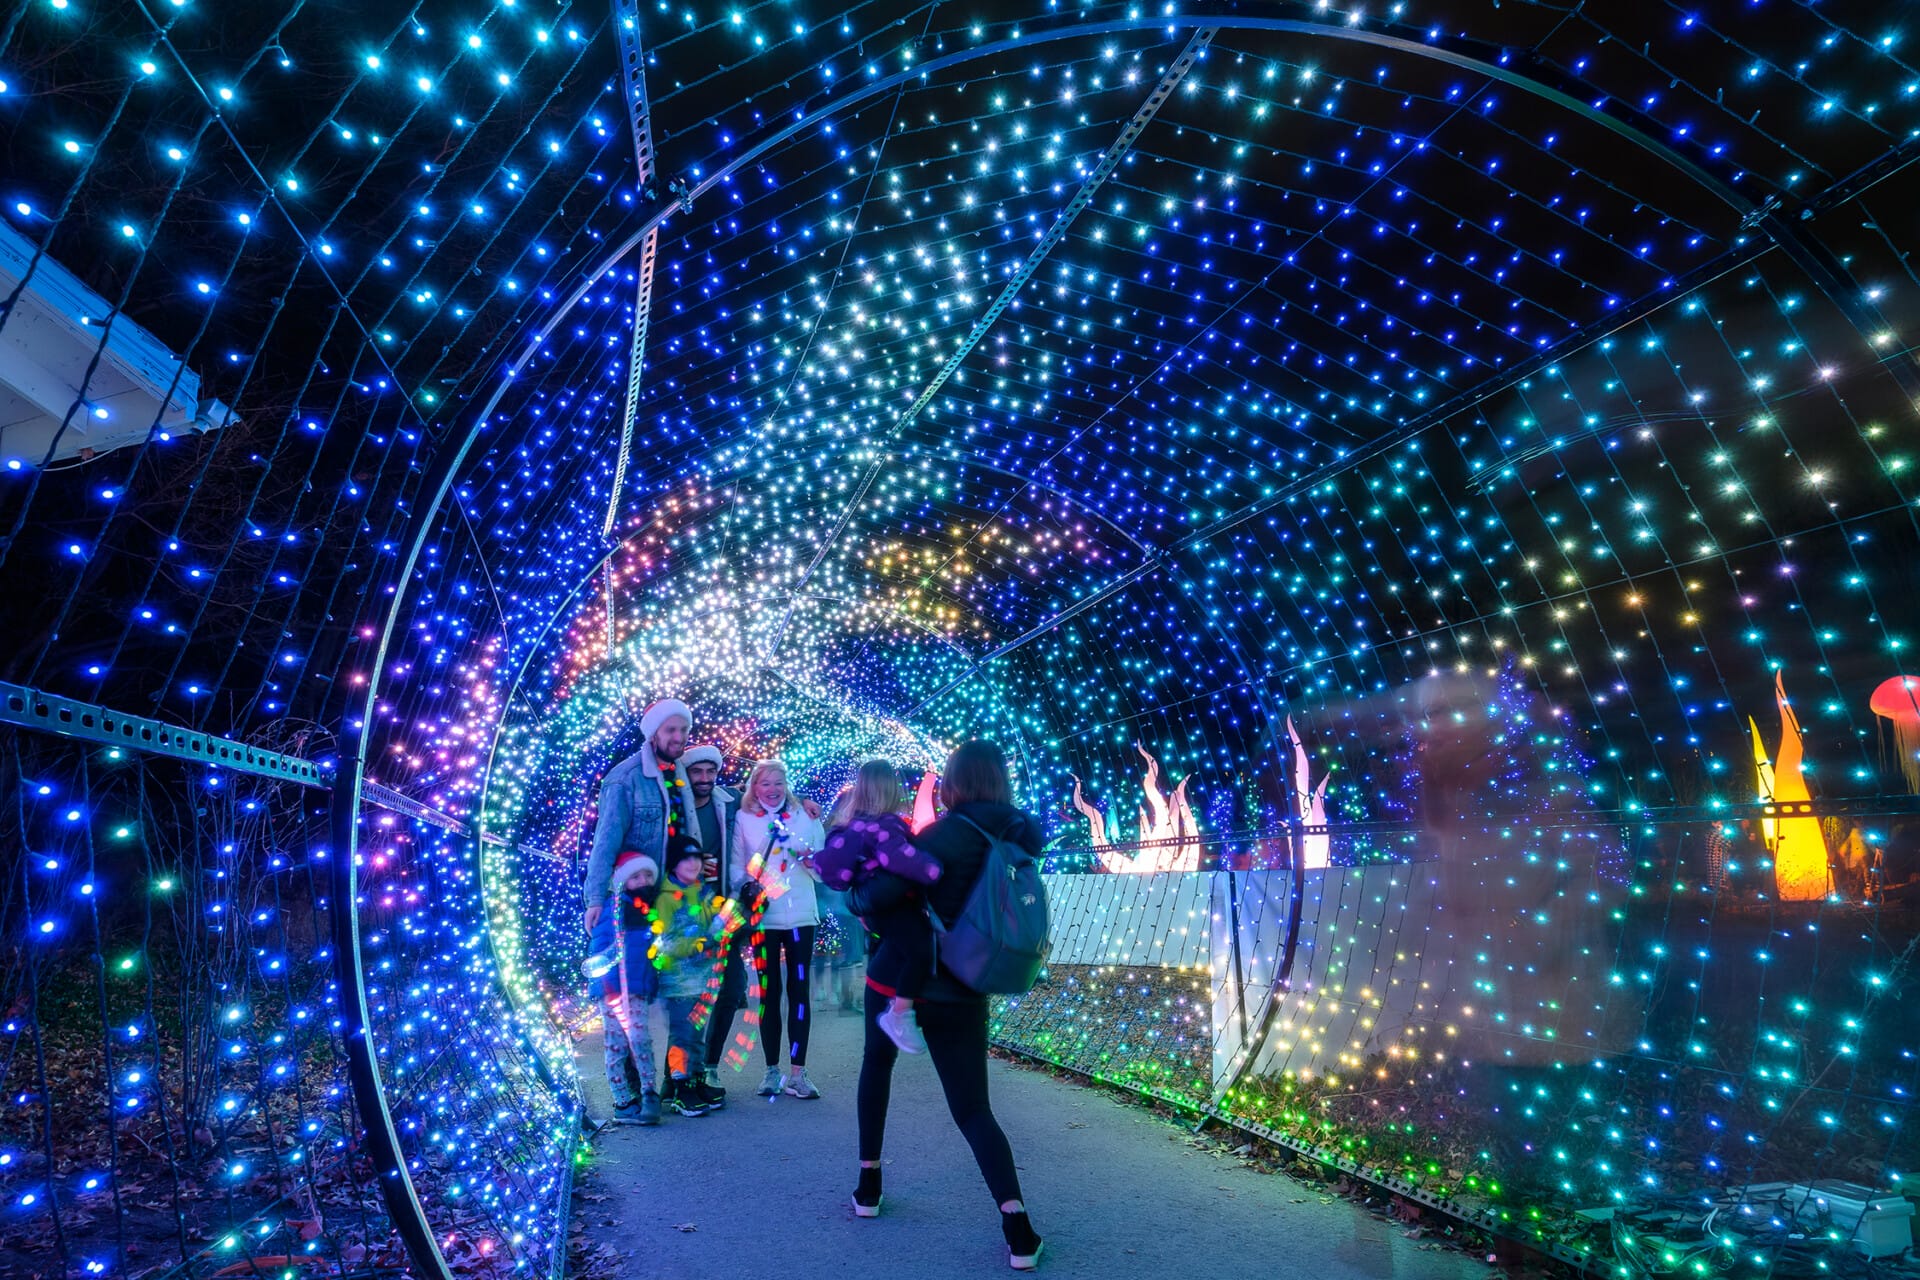 More than a million holiday lights will sparkle bright at Philadelphia Zoo for LumiNature 2023 presented by PNC